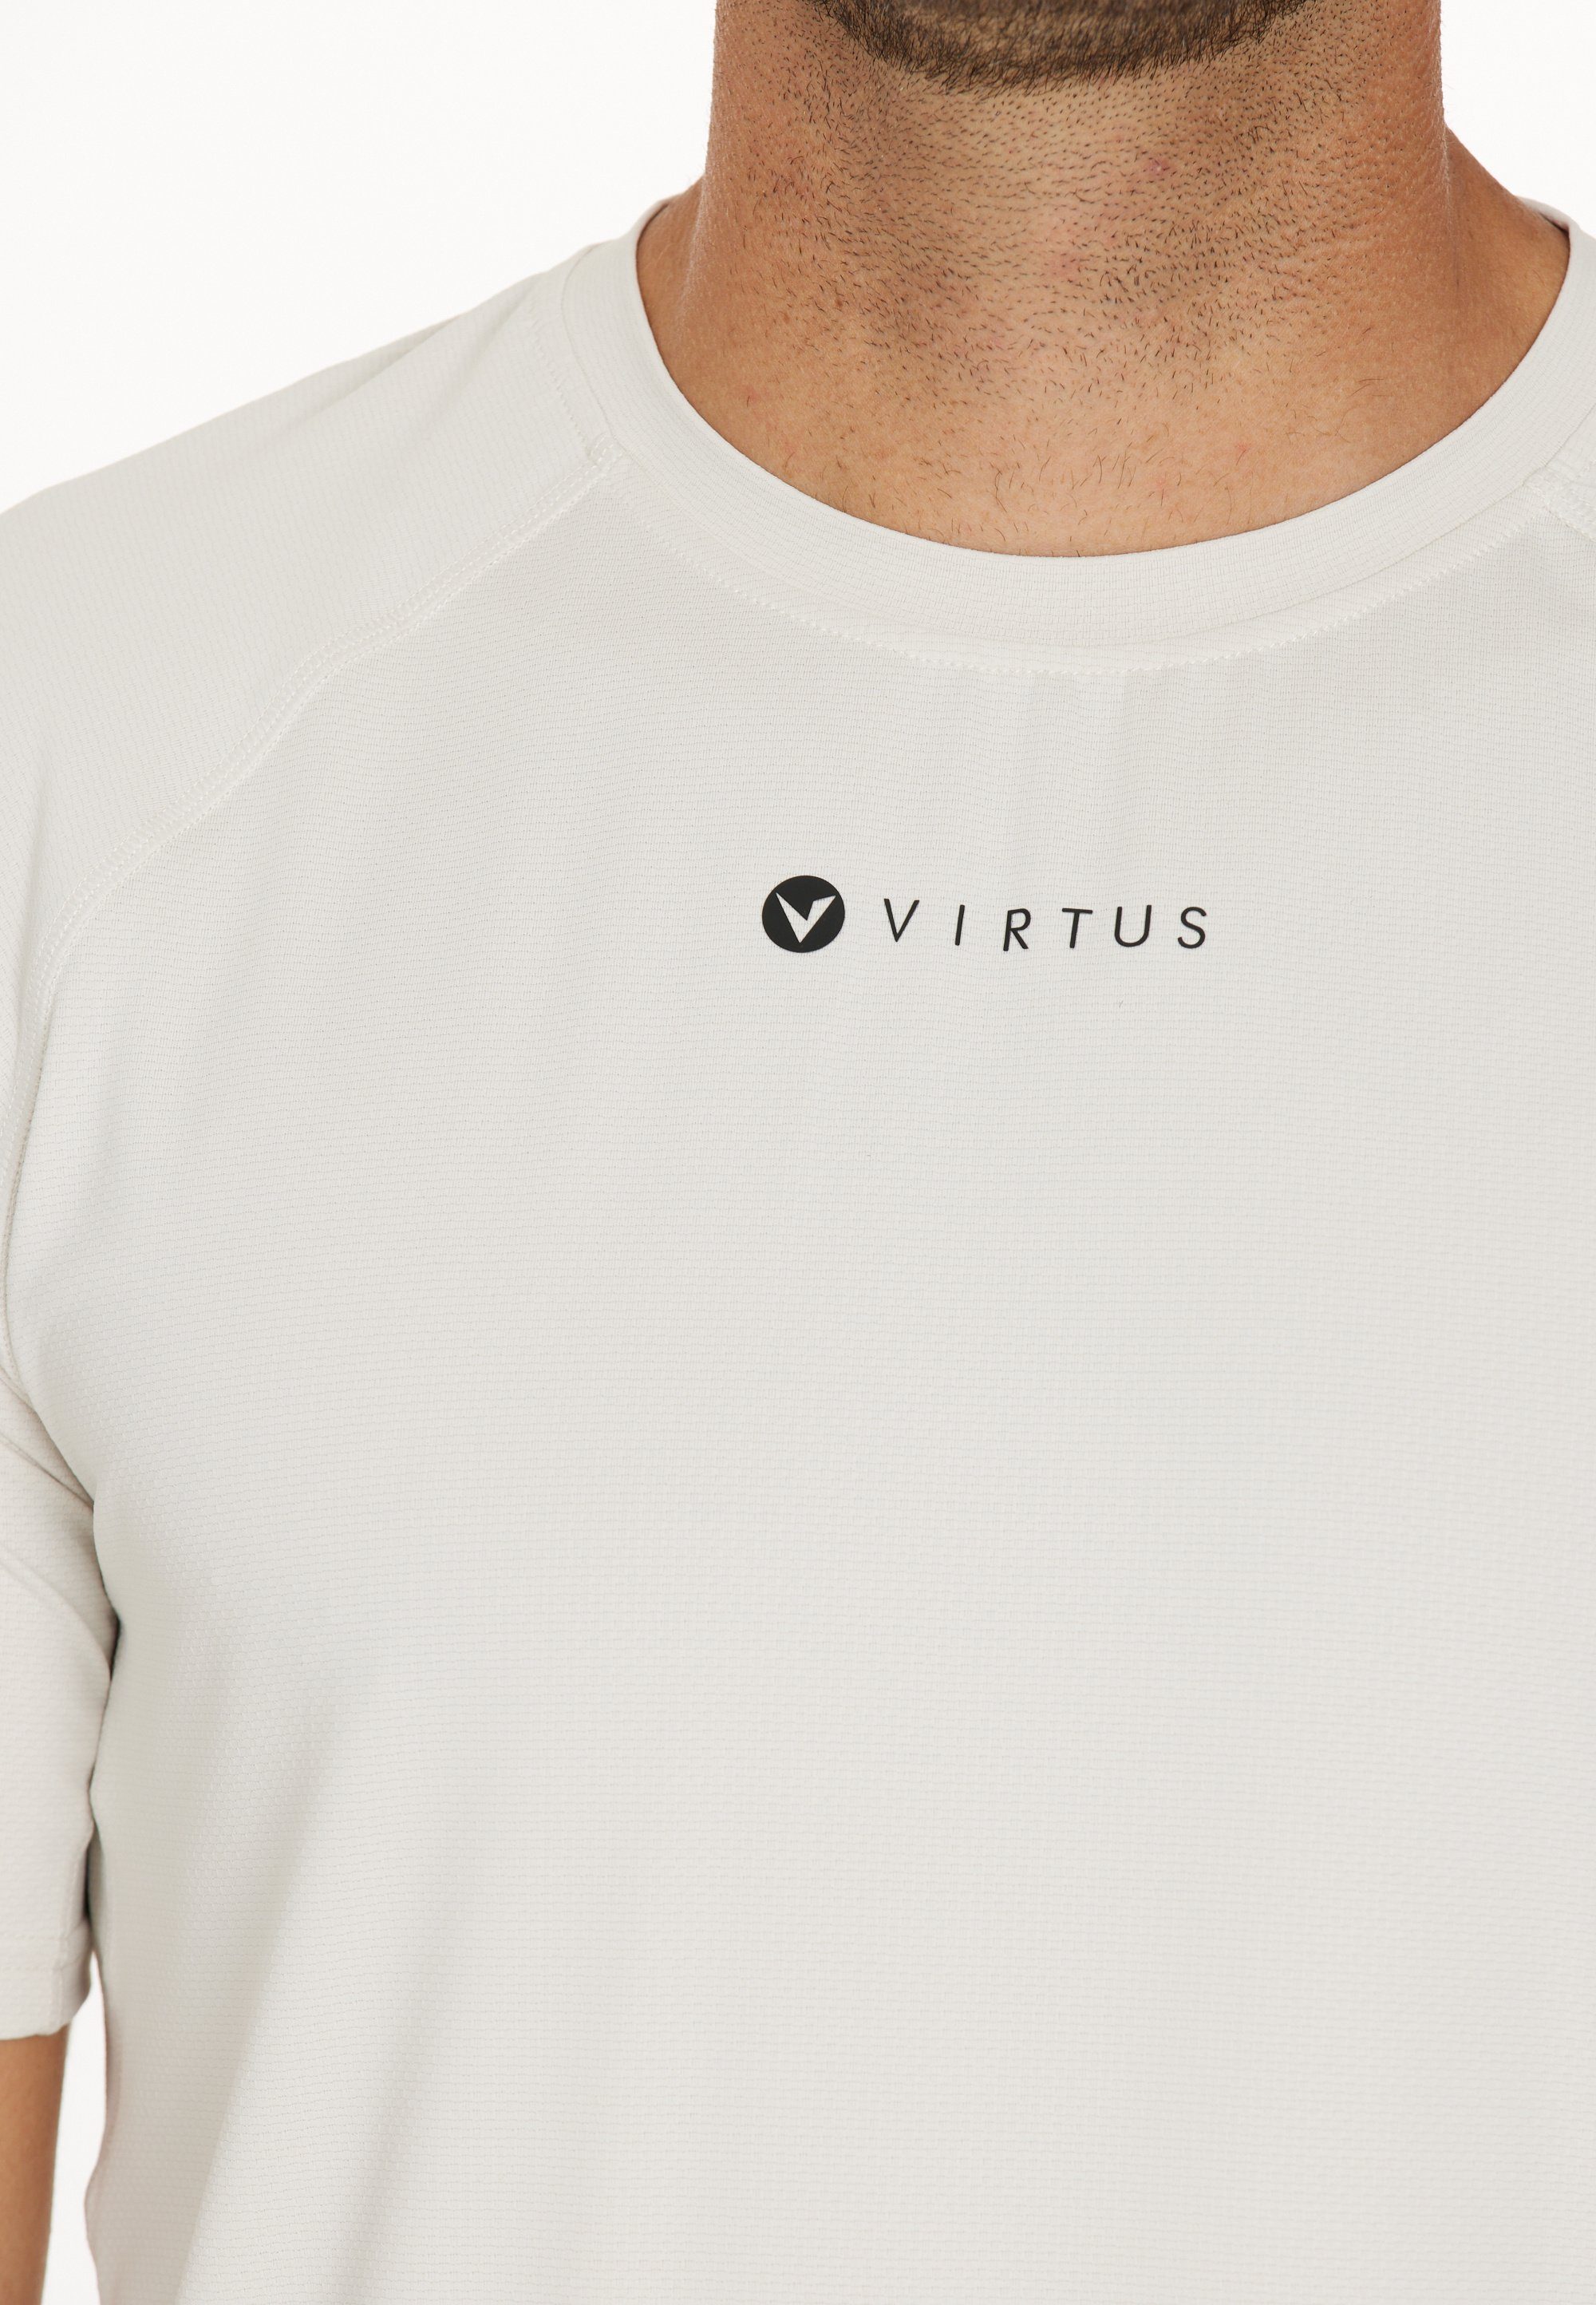 Toscan Muskelshirt Virtus Silver+-Technologie offwhite mit (1-tlg)